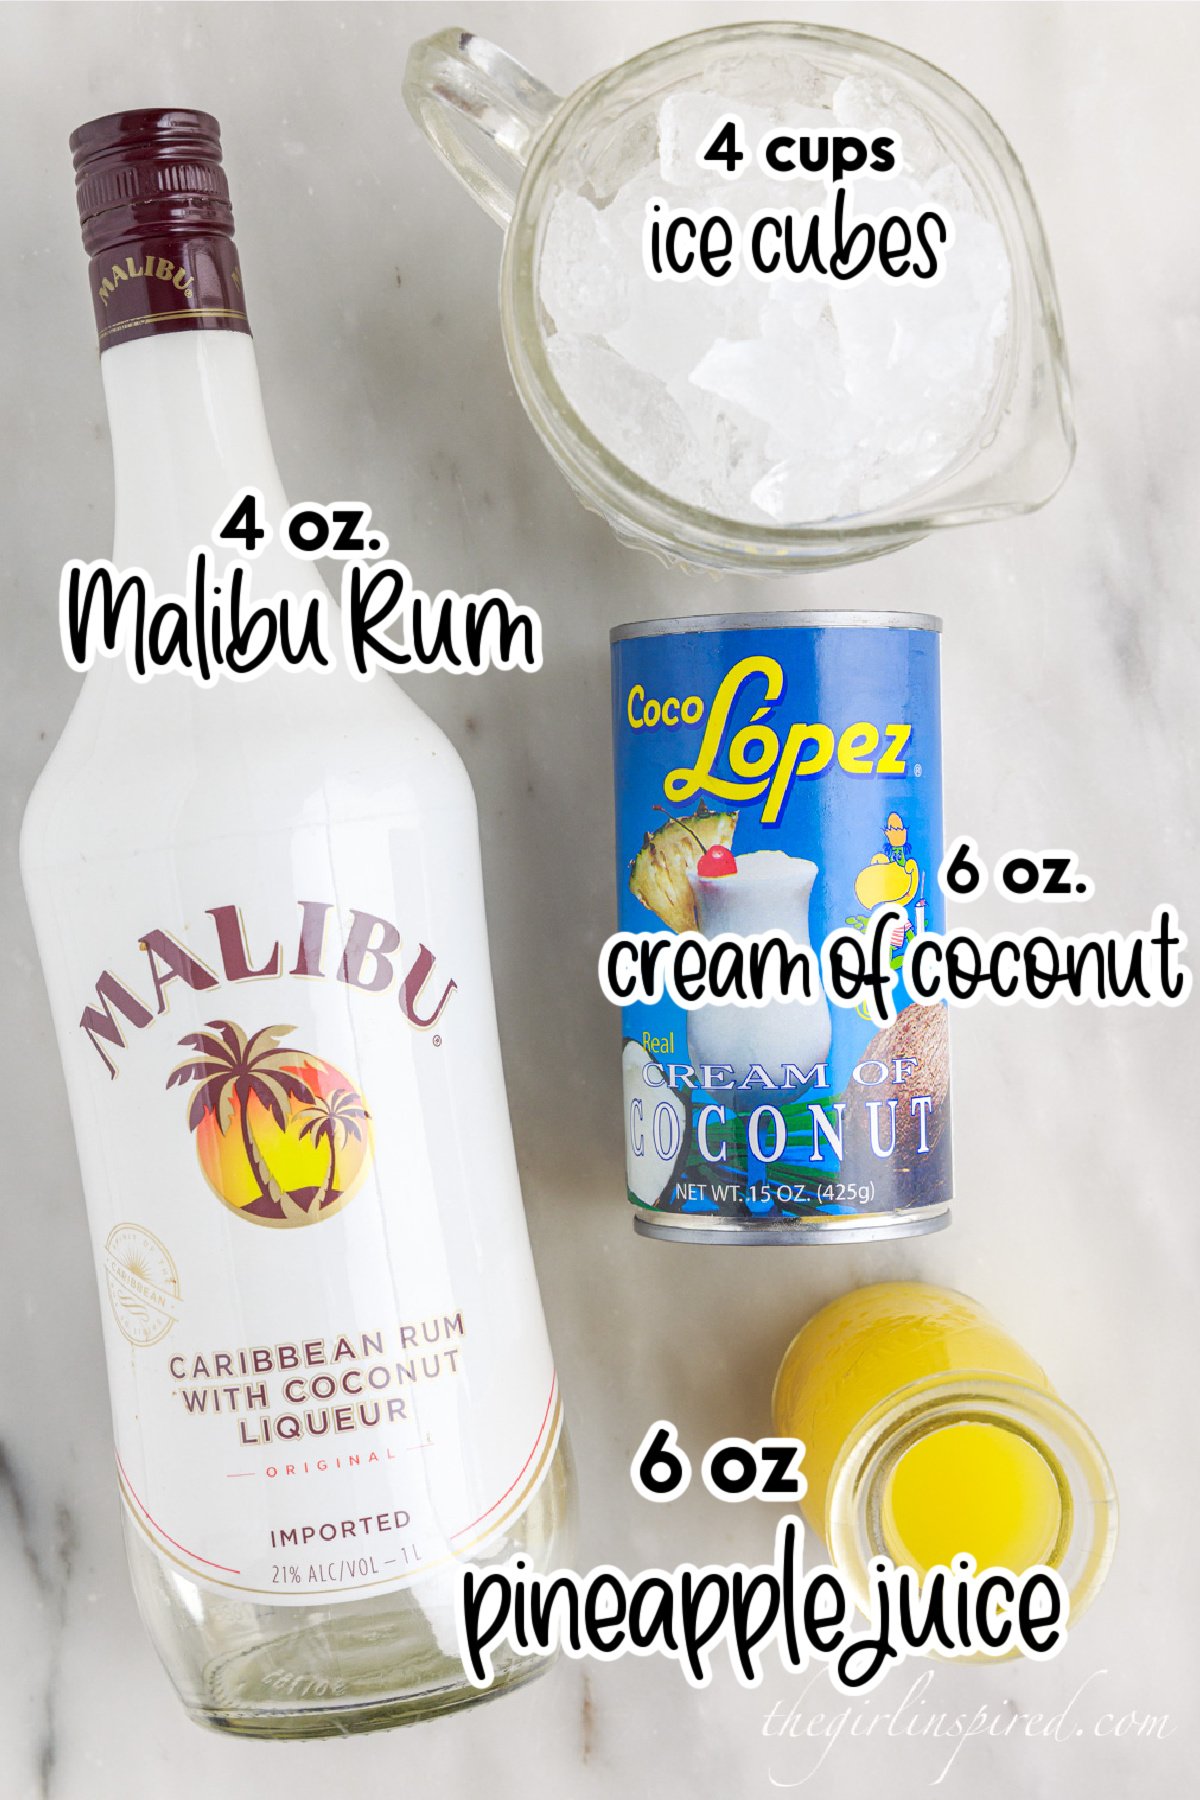 Bottle of Malibu rum, can of cream of coconut, measuring cup with ice cubes, bottle of pineapple juice, with text labels of all the piña colada ingredients.